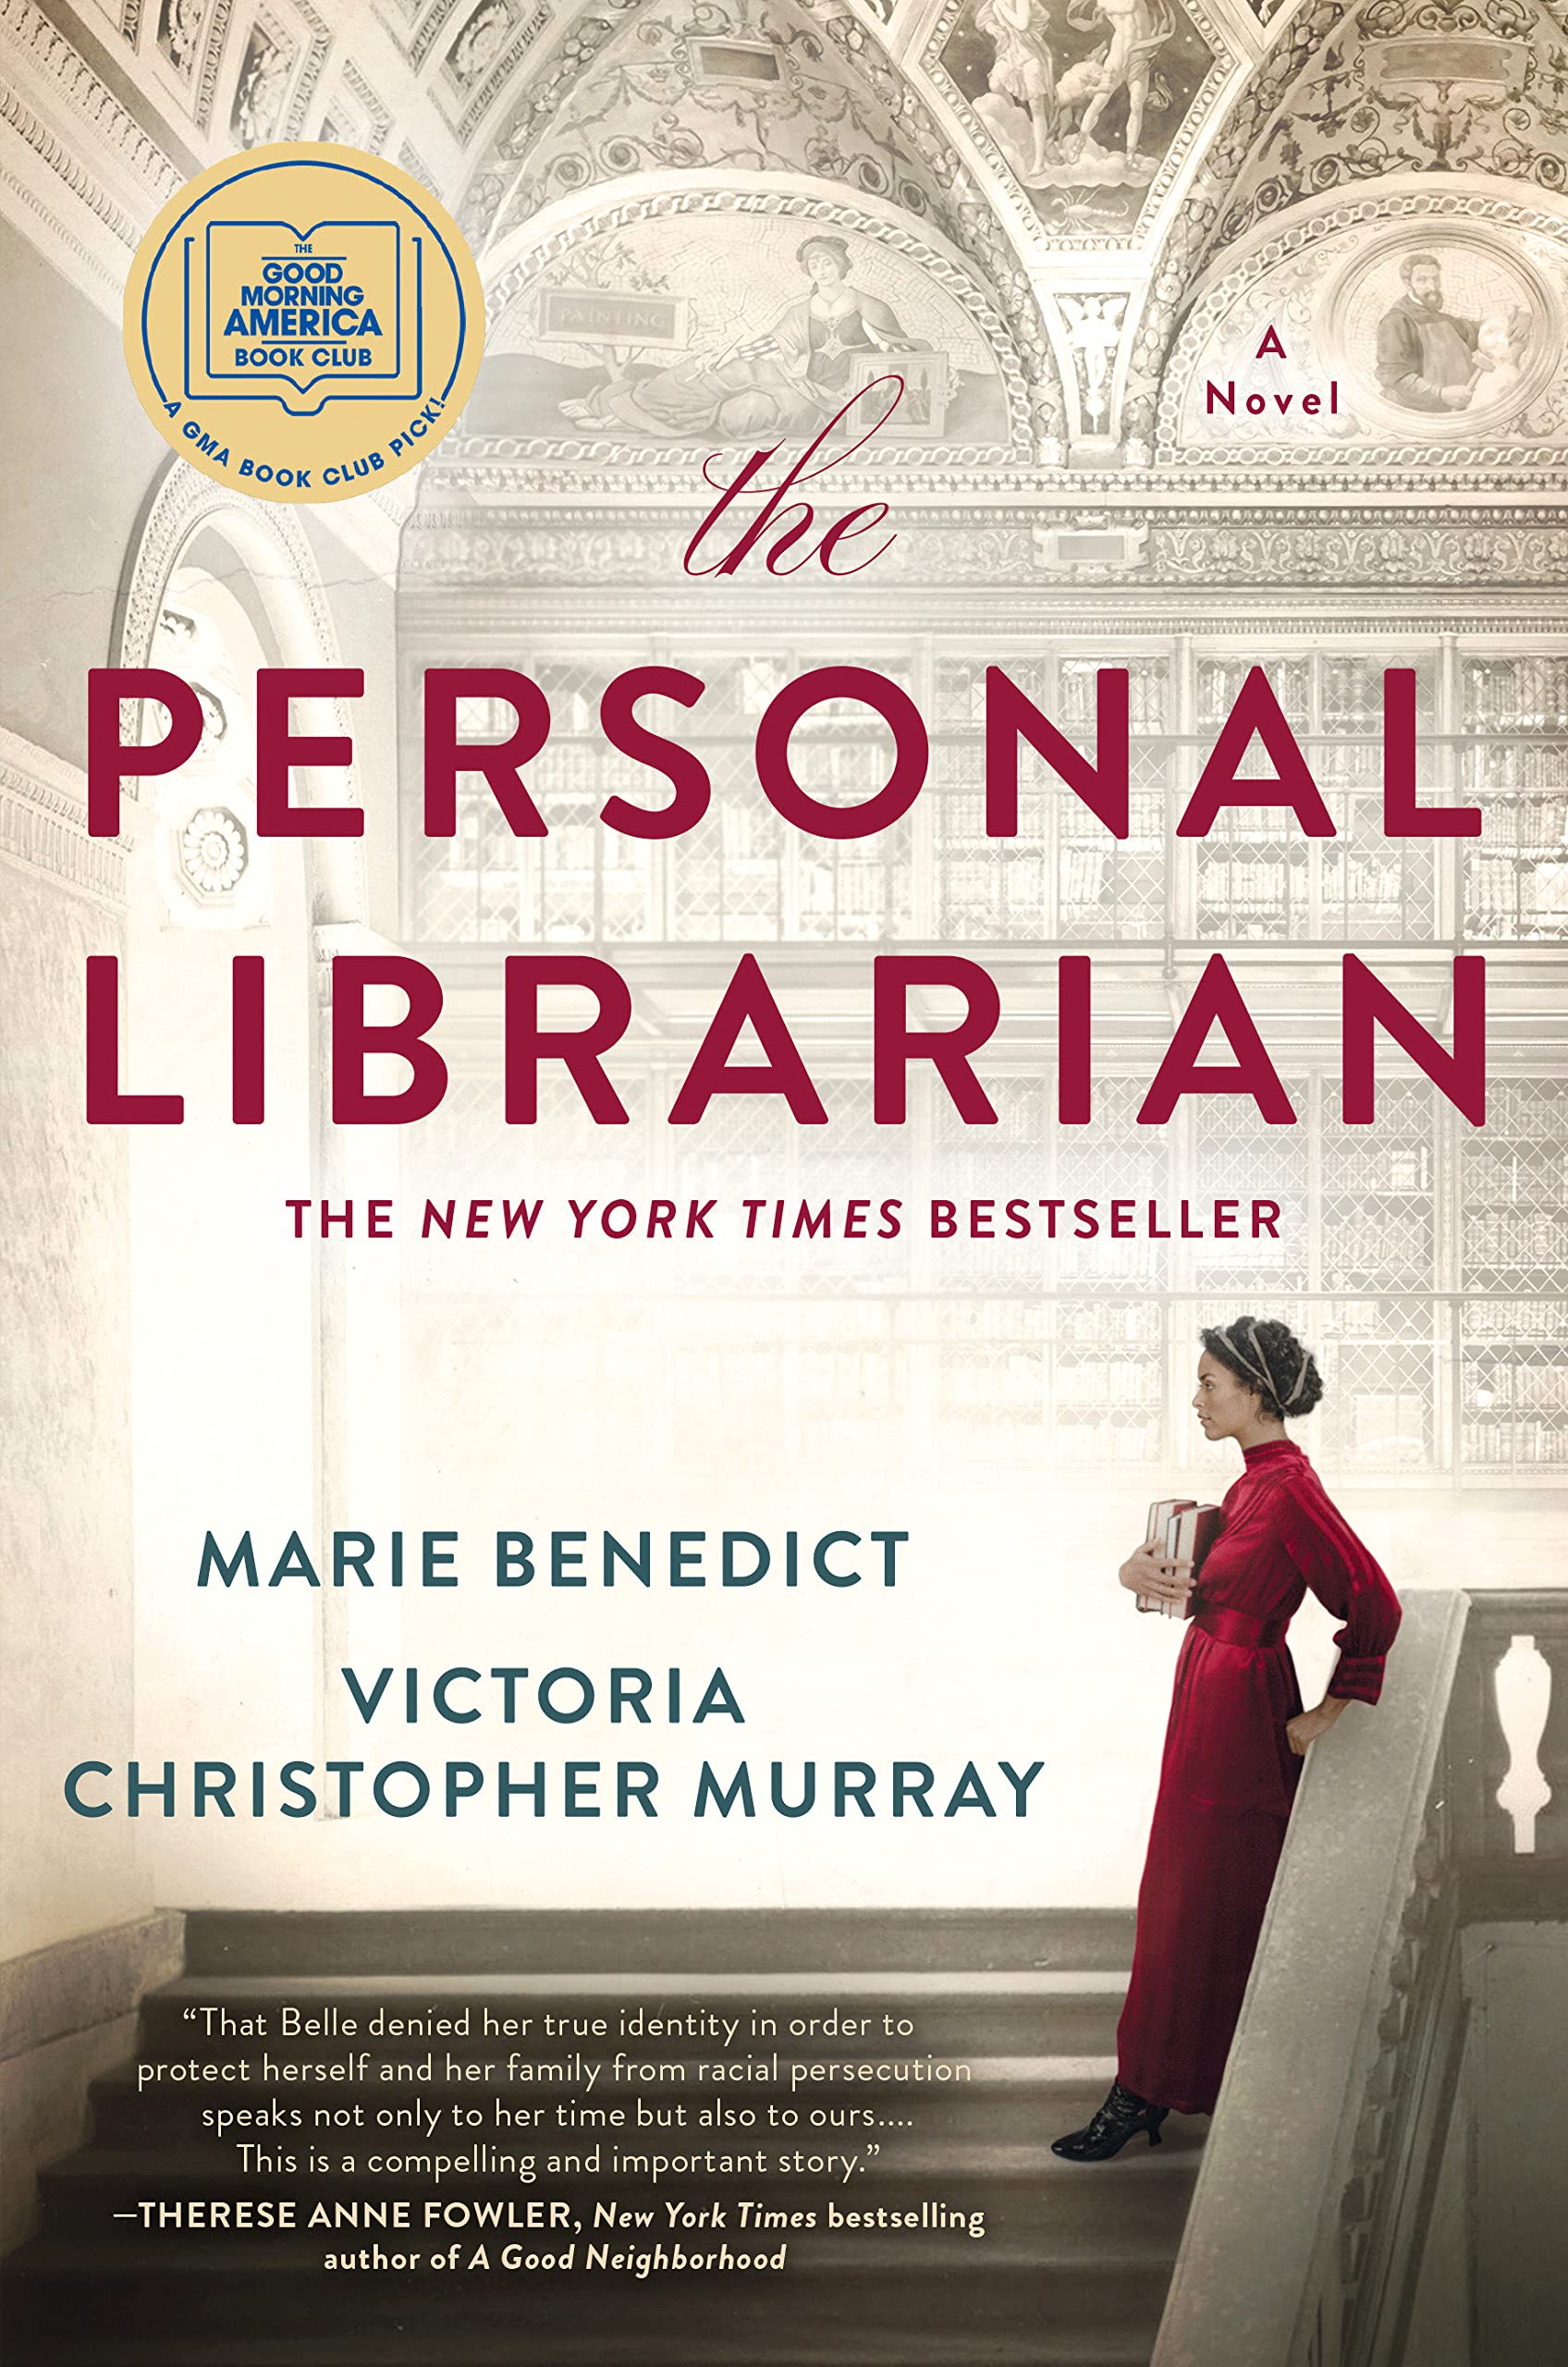 Virtual Morning Book Club: "The Personal Librarian"